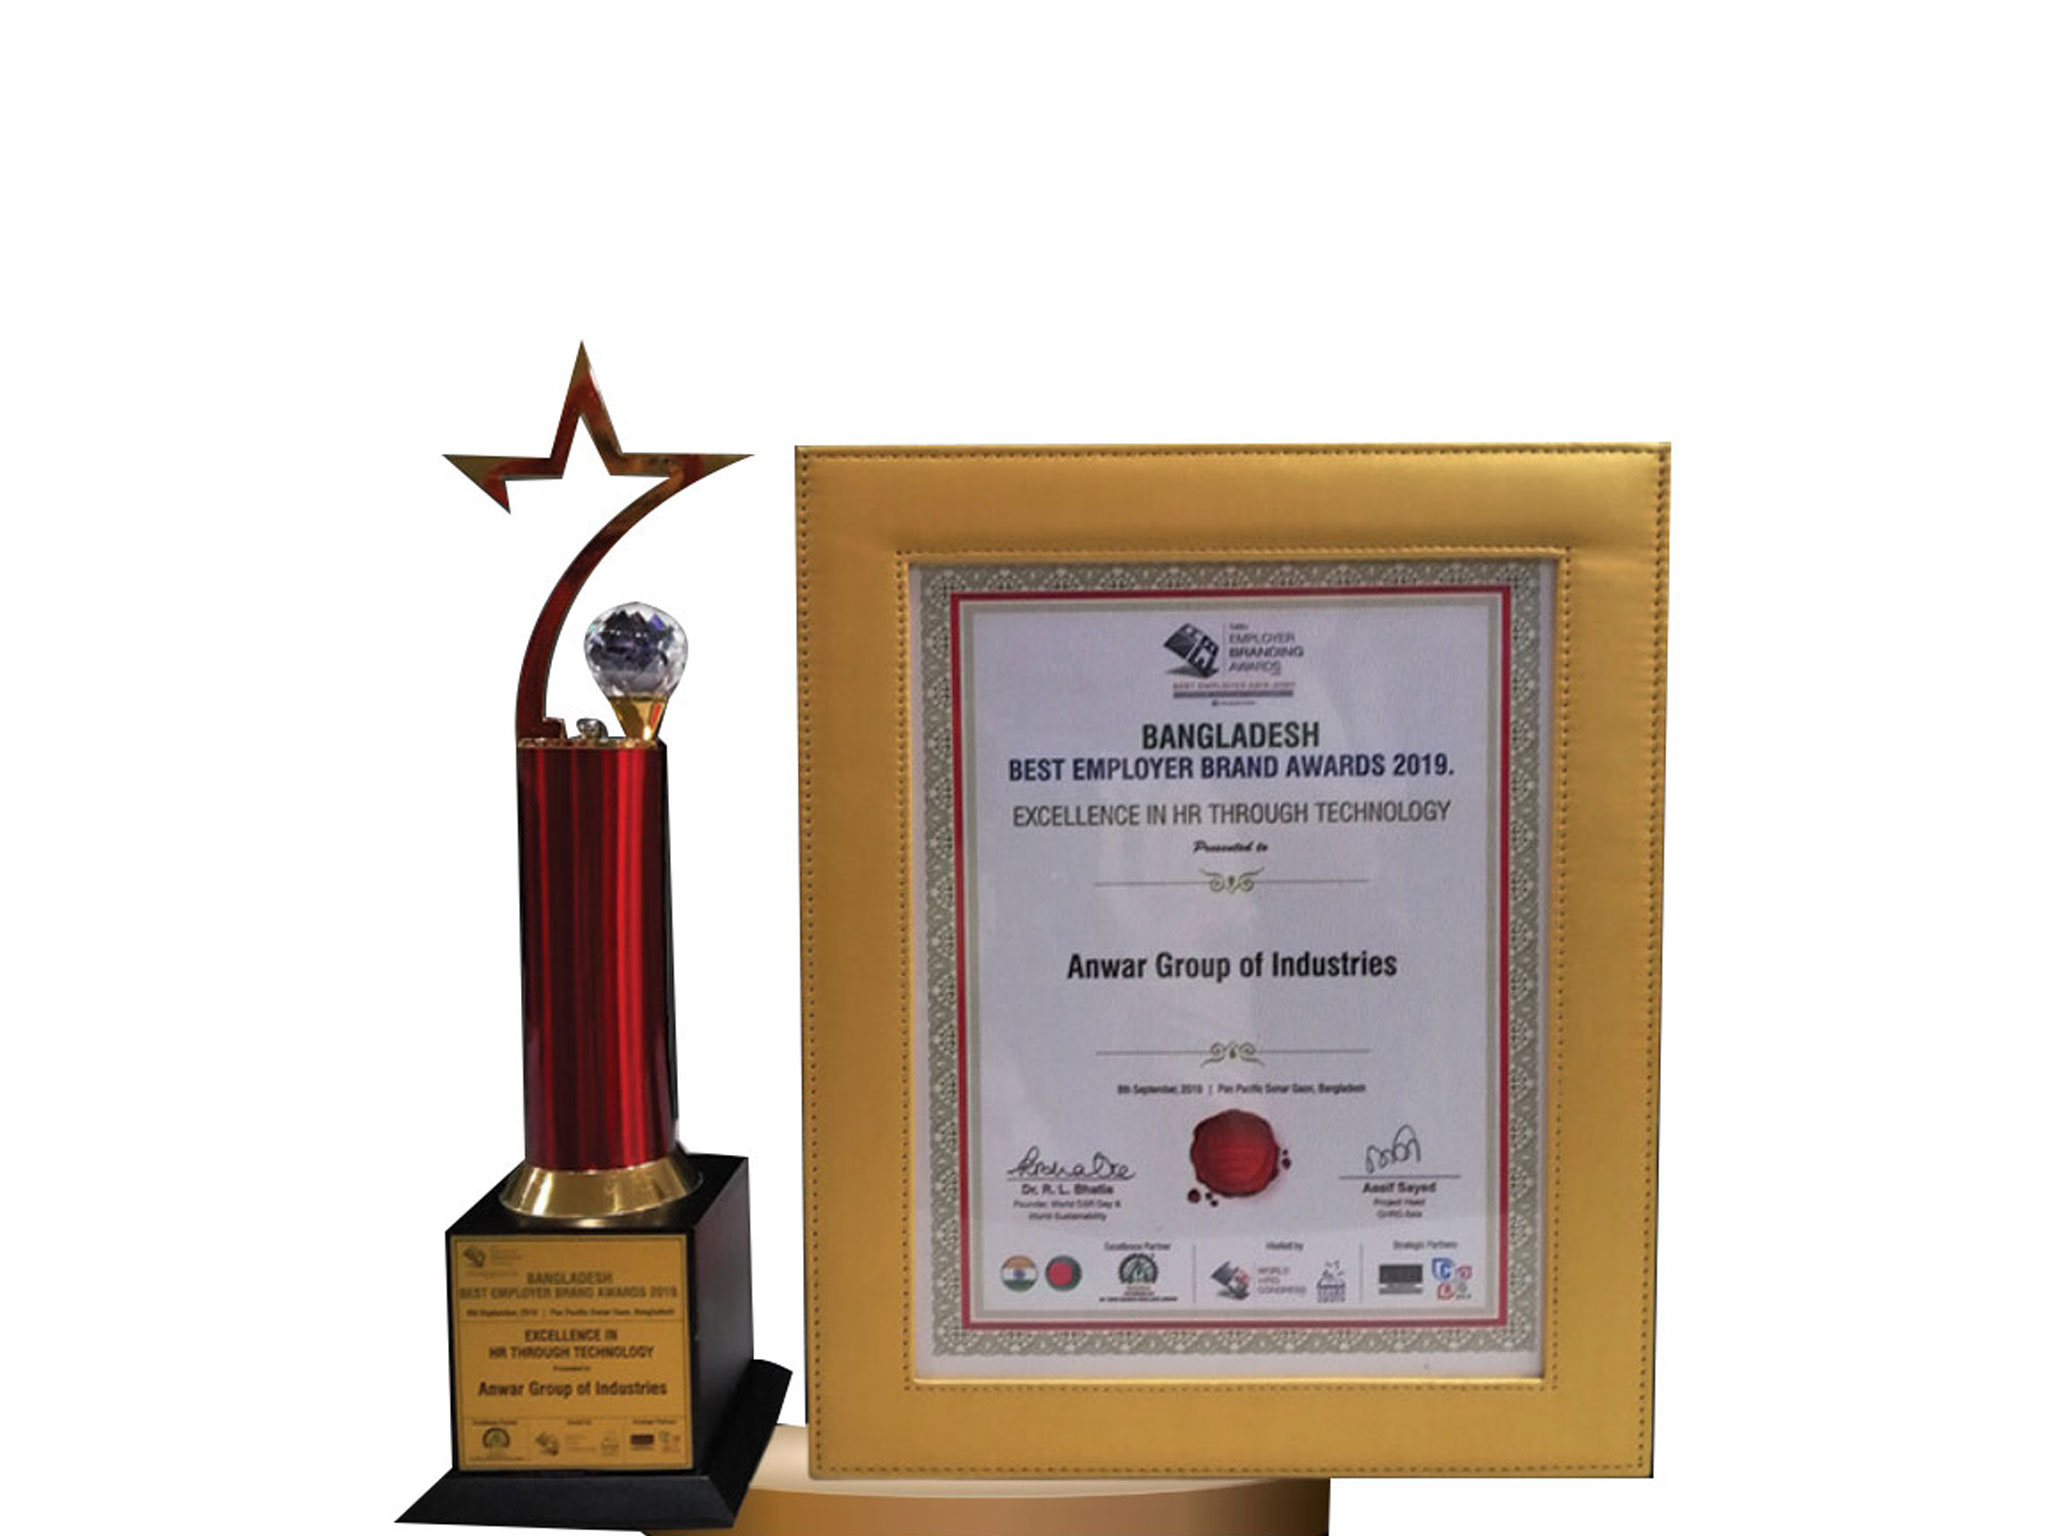 Excellence-in-HR-through-Technology-Award-by-World-HRD-Congress